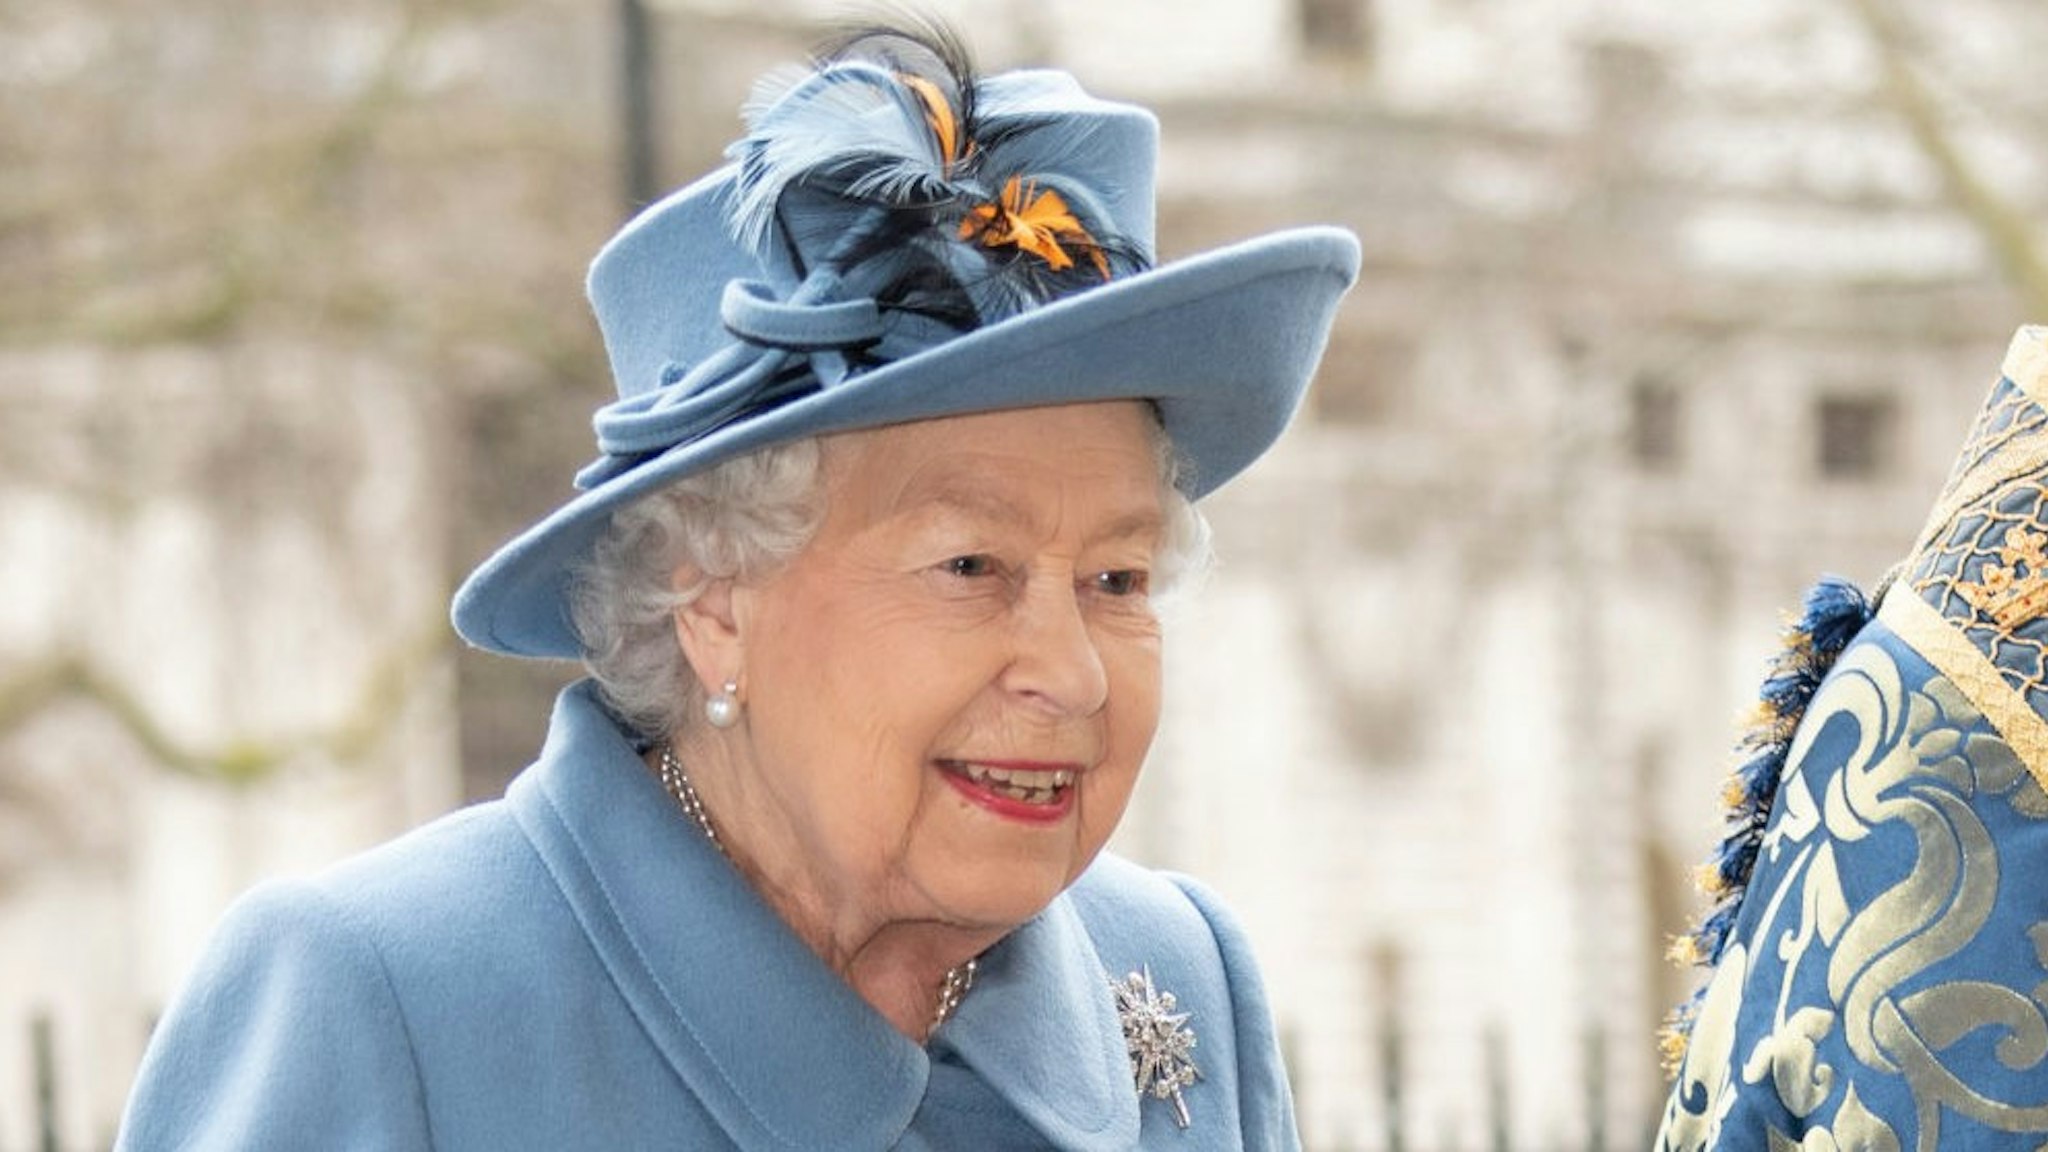 LONDON, ENGLAND - MARCH 09: Queen Elizabeth II attends the Commonwealth Day Service 2020 at Westminster Abbey on March 9, 2020 in London, England. (Photo by